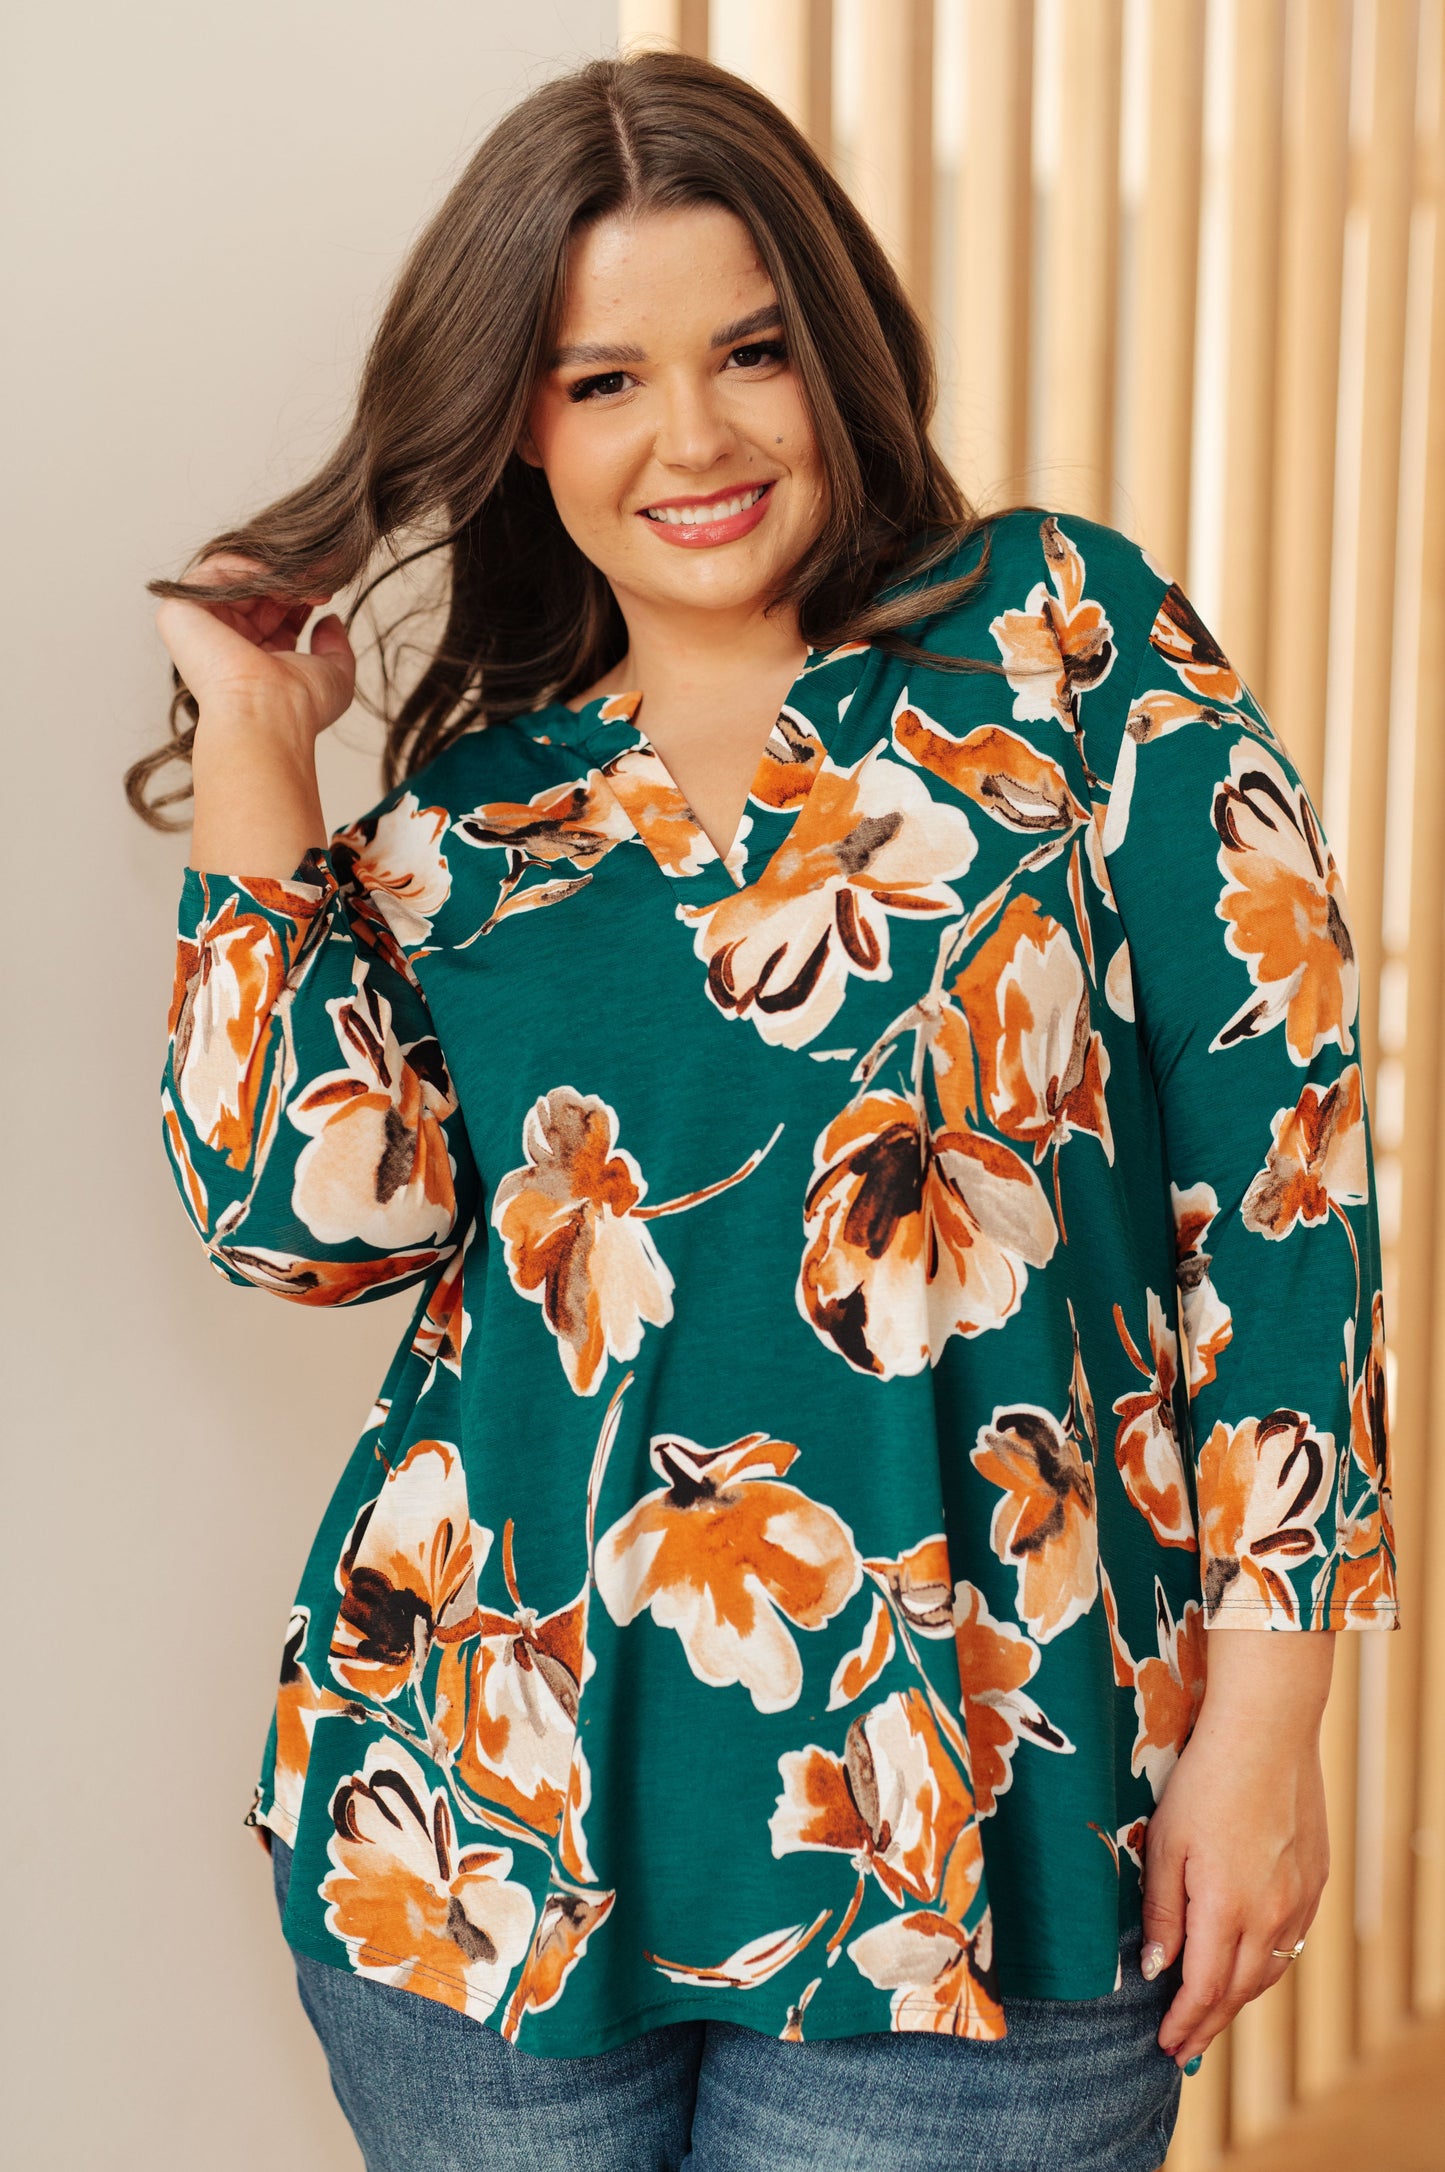 I Think Different Top in Bayou Floral